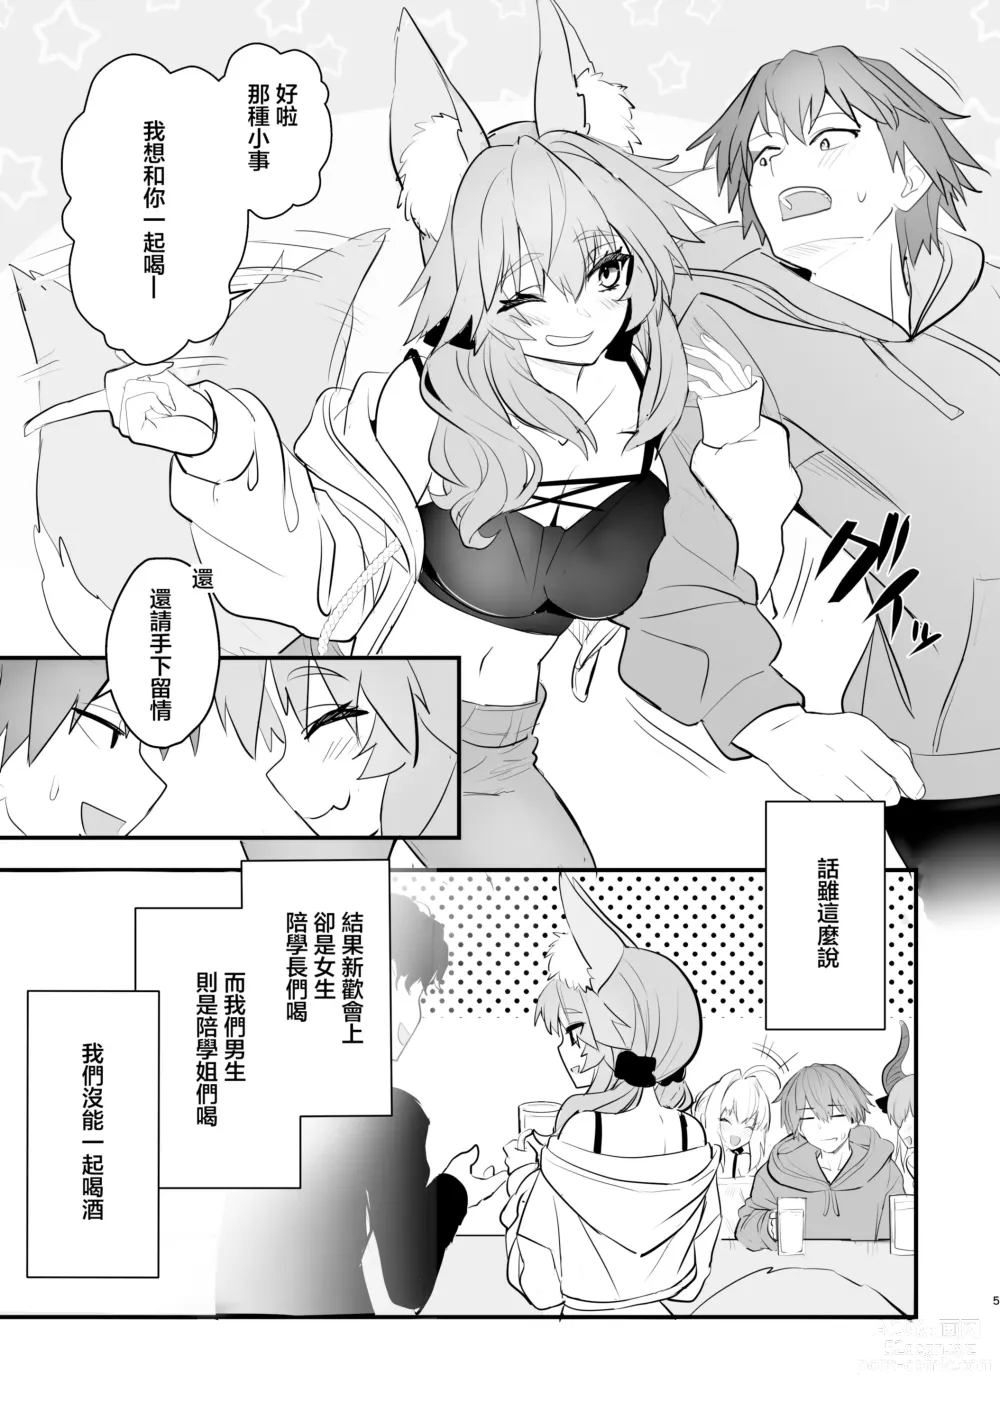 Page 4 of doujinshi 玉藻前大學物語